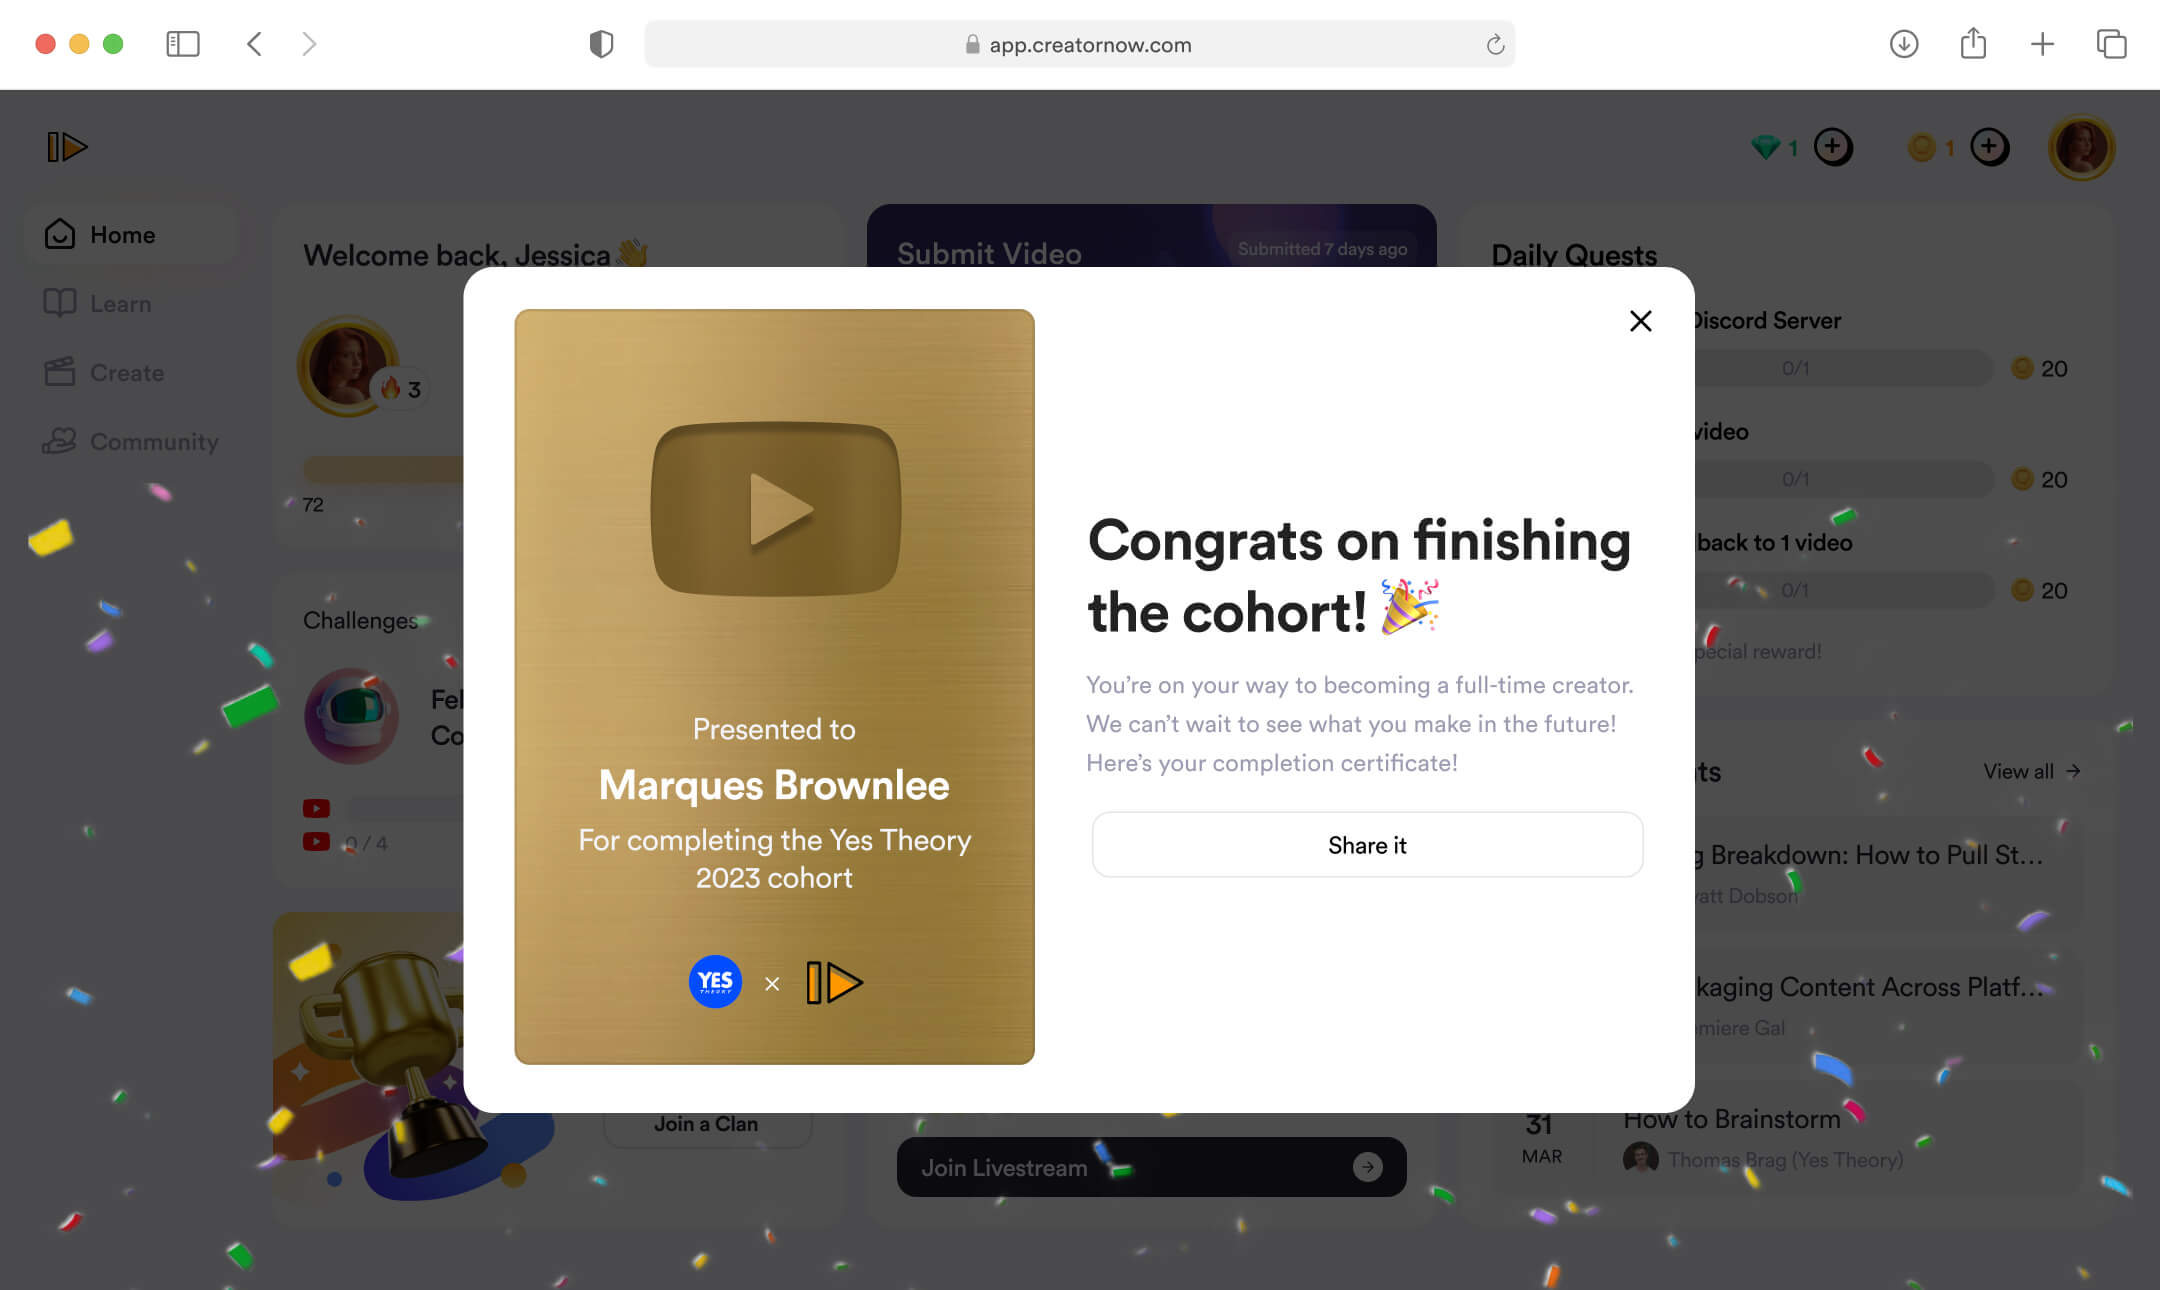 Popup congratulating the creator for completing the Yes Theory cohort